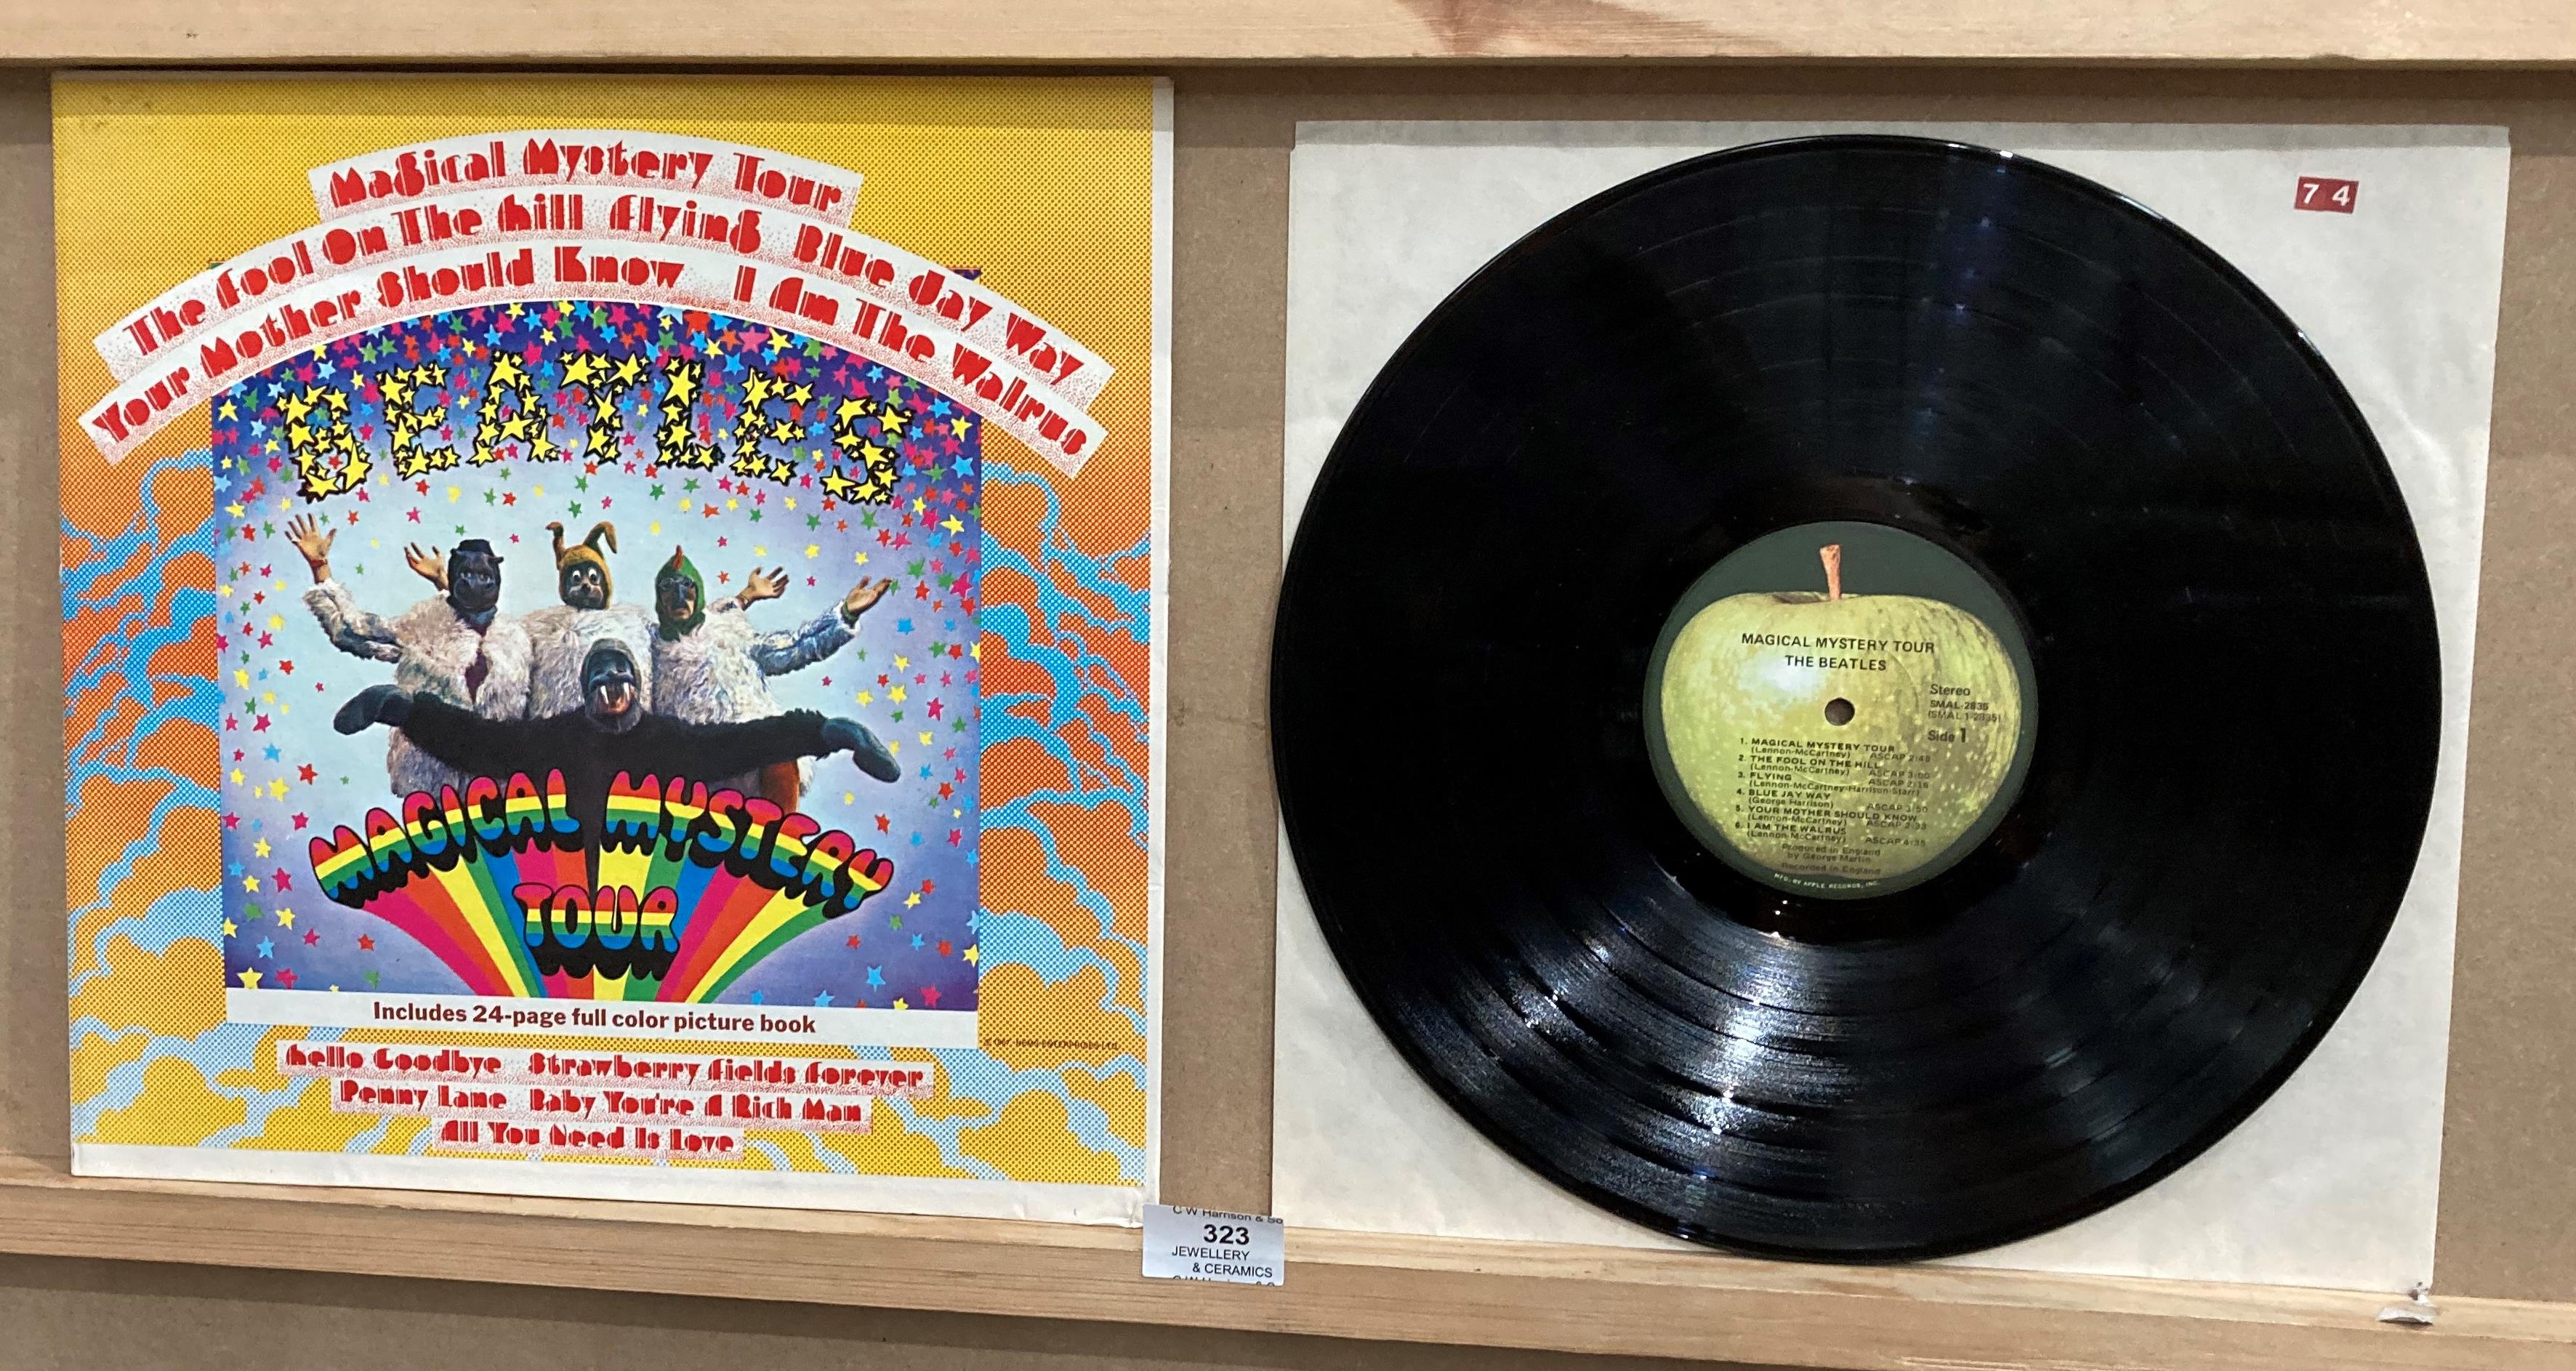 The Beatles LP 'Magical Mystery Tour' on Apple EMI Records no.